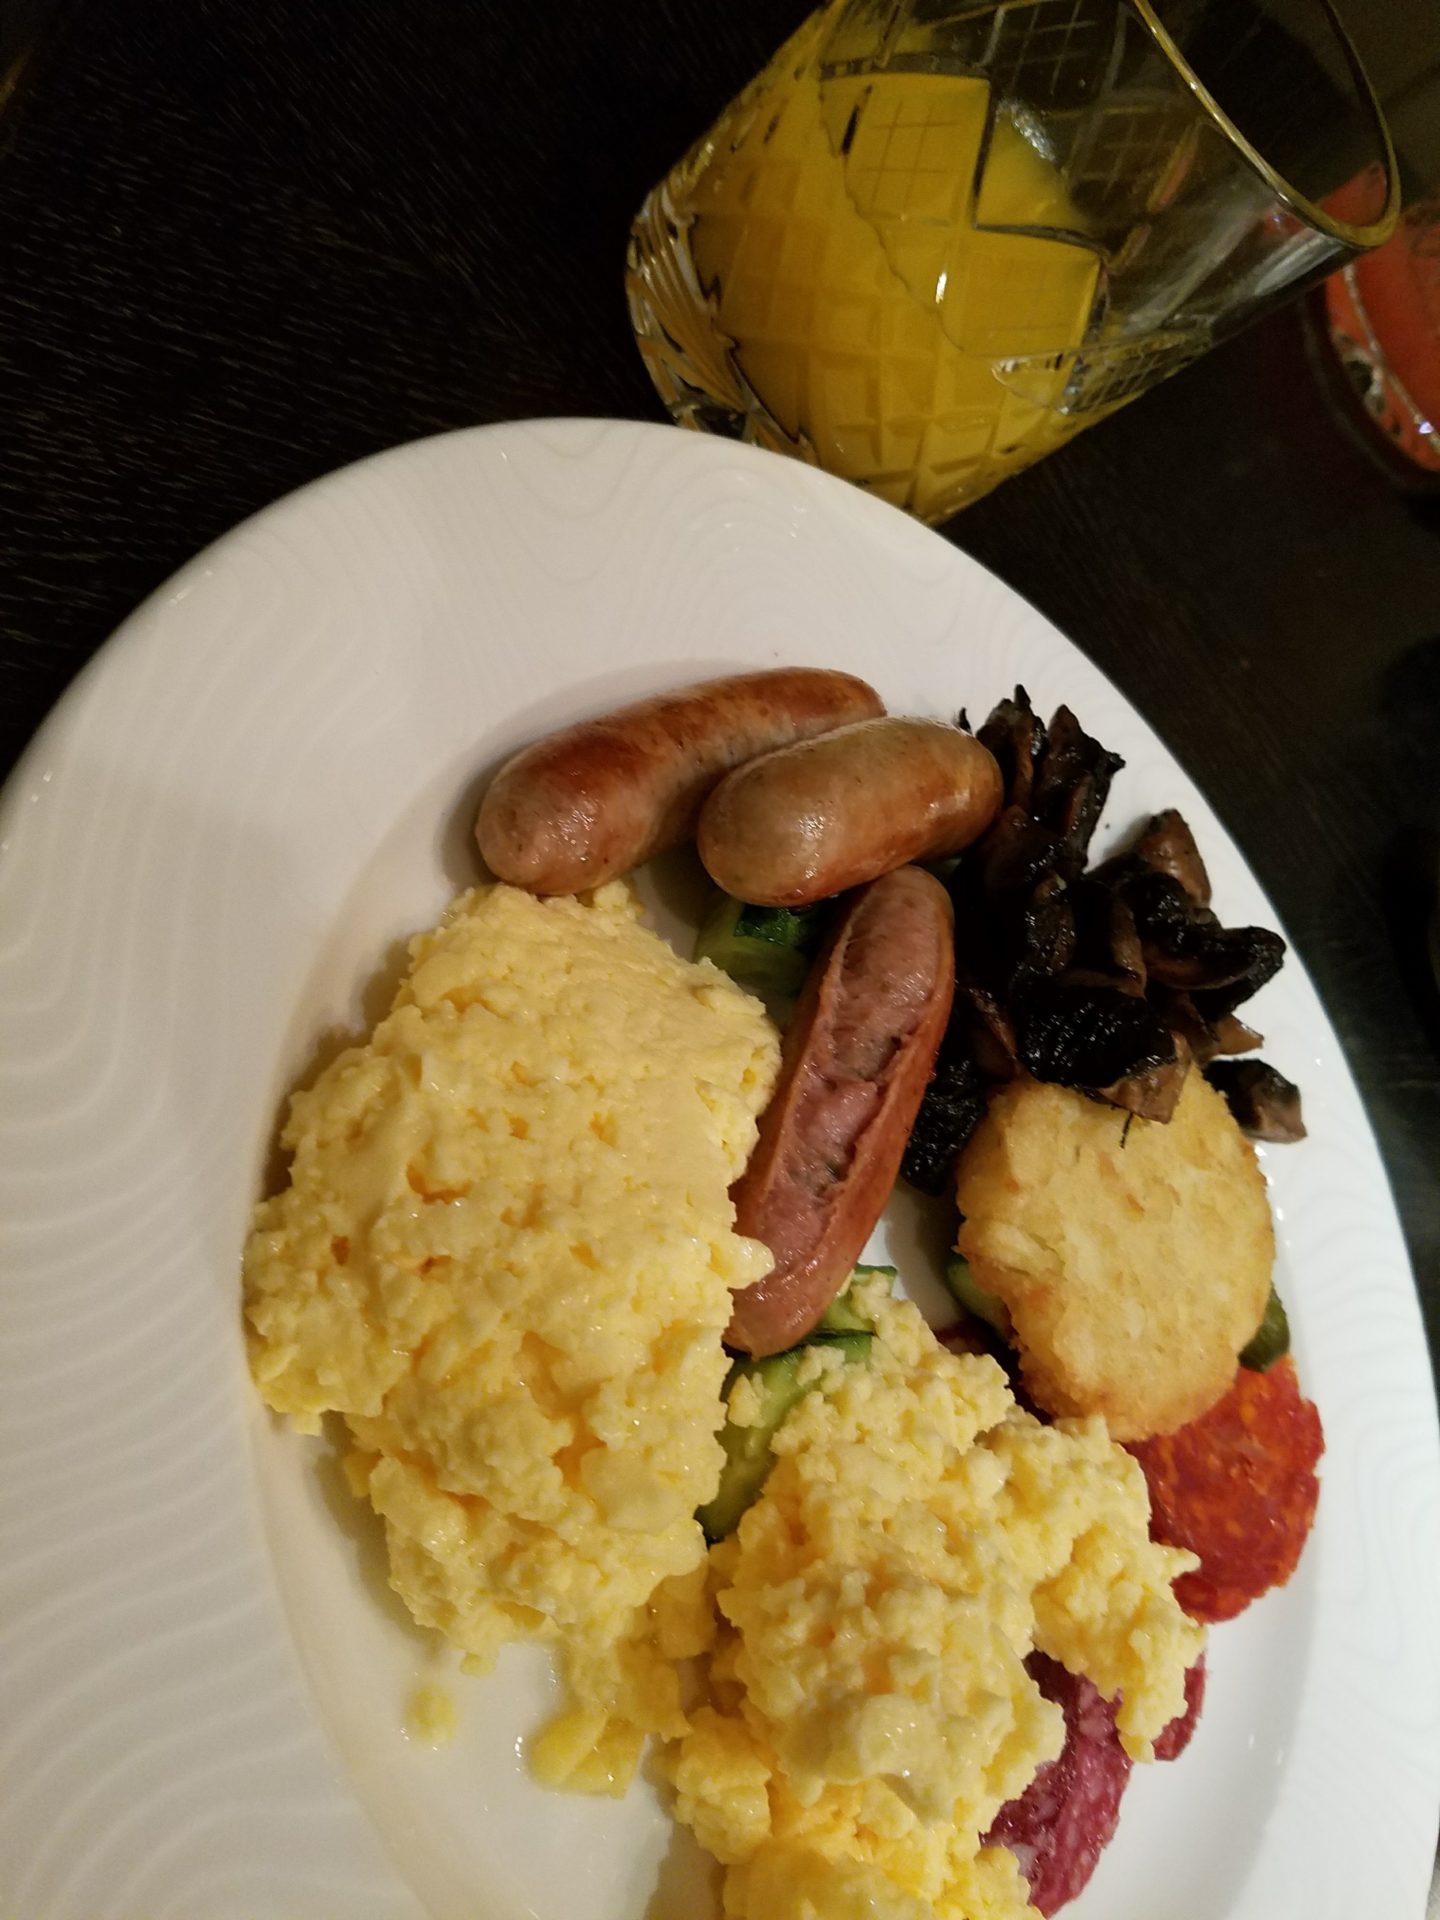 a plate of food and a glass of juice